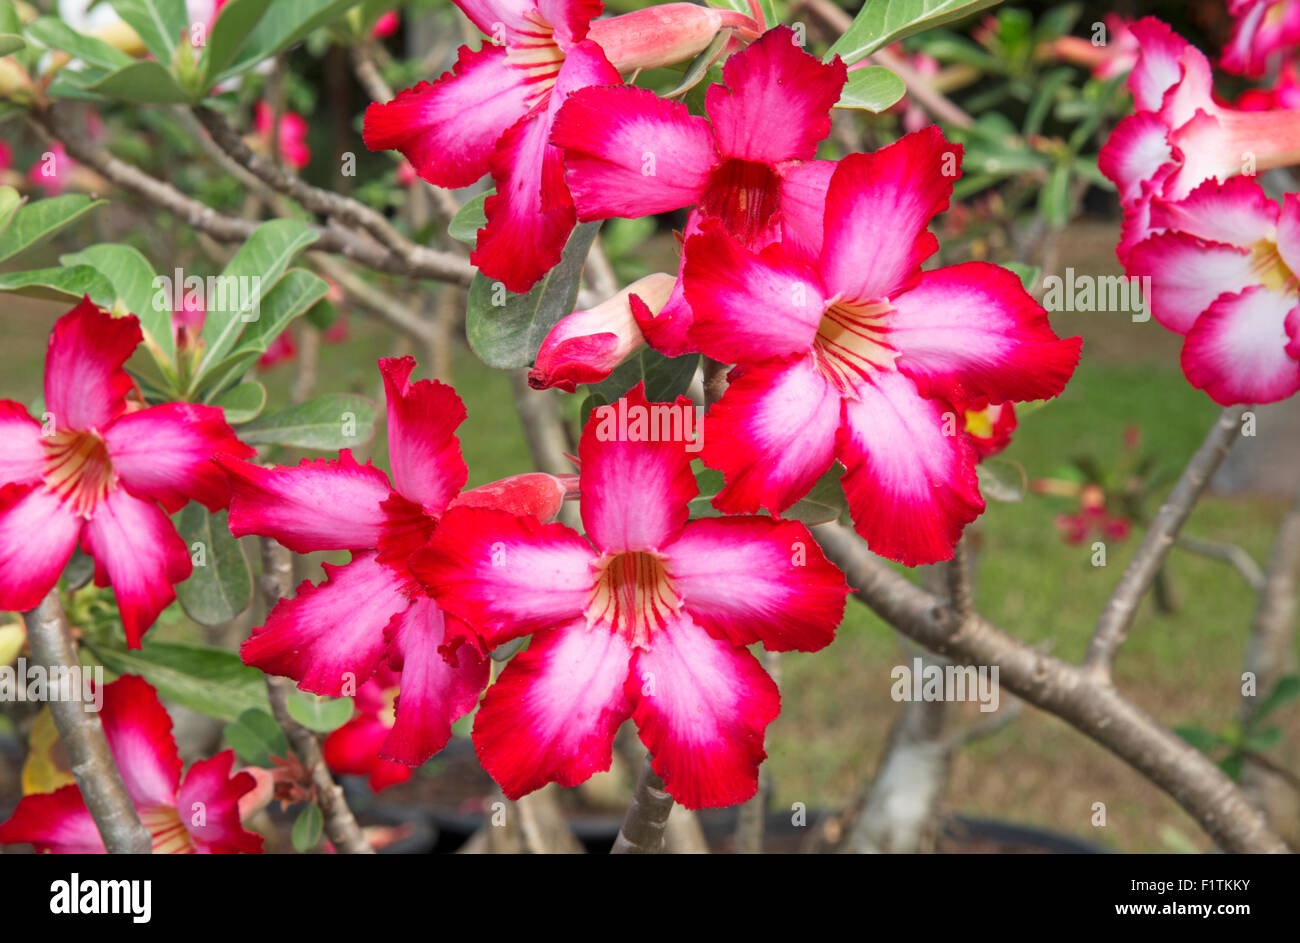 Red frangipani flowers on the branches of its tree Stock Photo